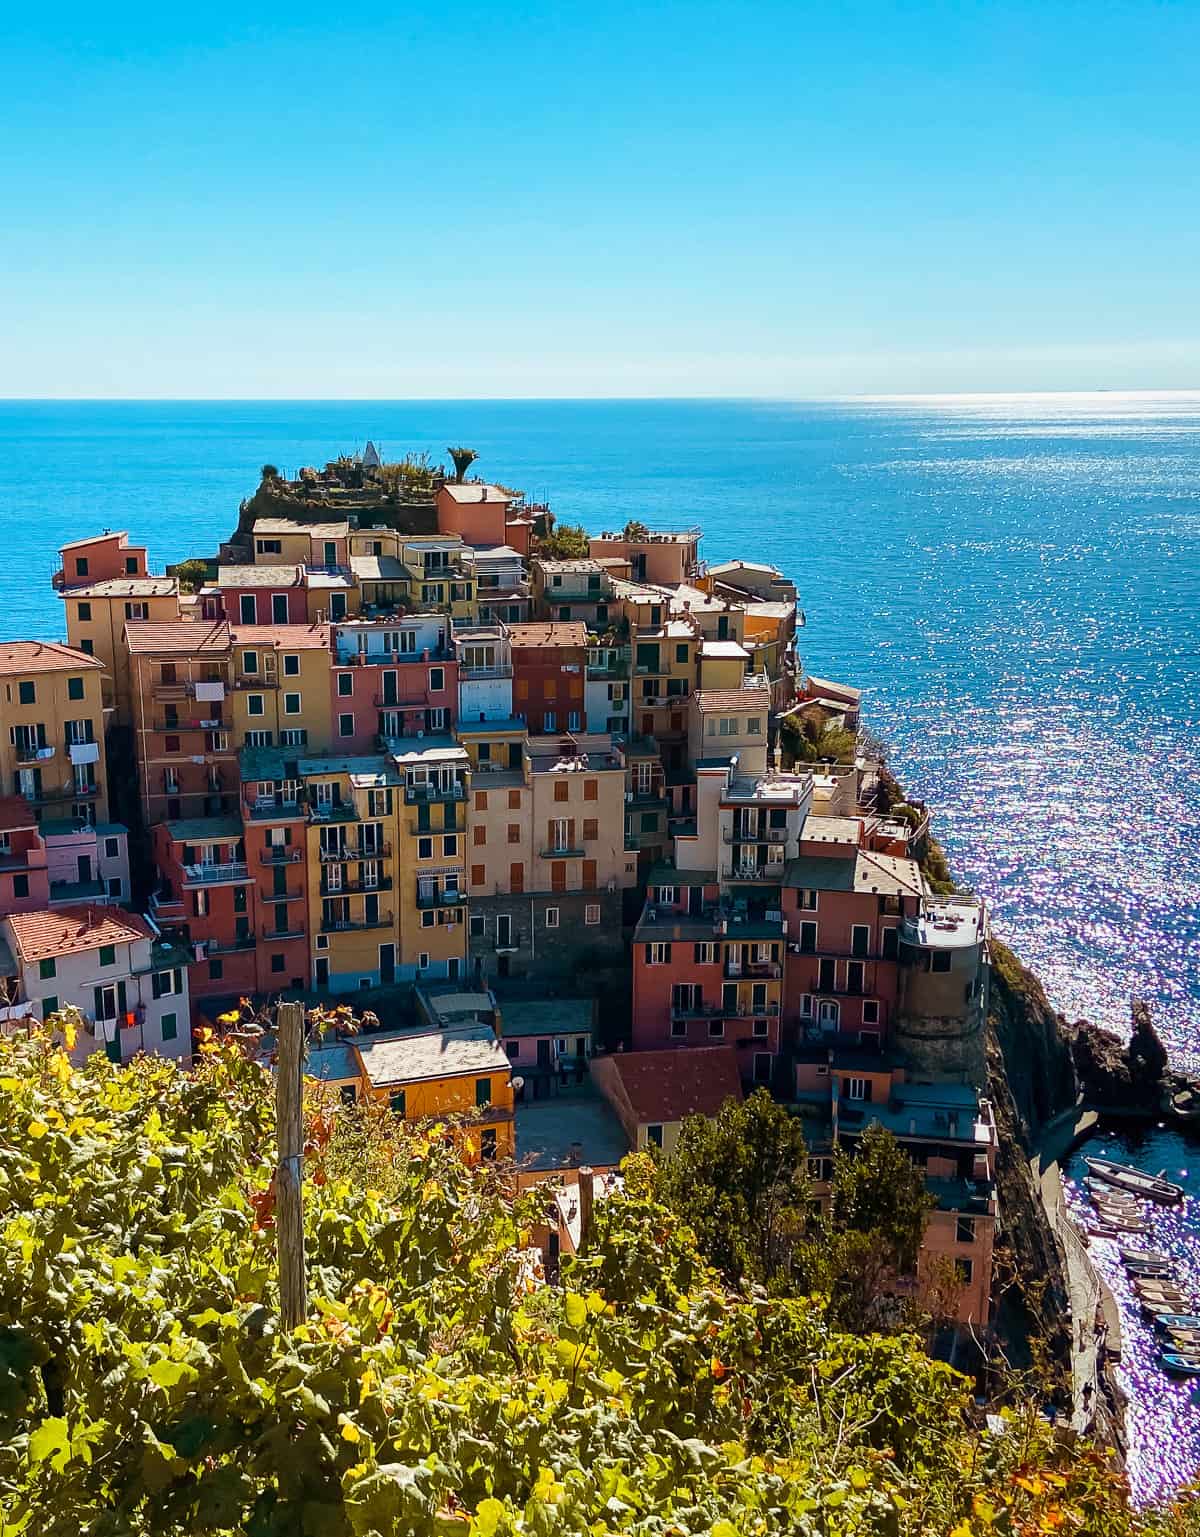 Sun-kissed colorful houses of Cinque Terre perch on the rugged Italian Riviera coastline, with sparkling blue waters of the Mediterranean Sea below, framed by a verdant vineyard in the foreground, encapsulating the quintessential charm of Italy.